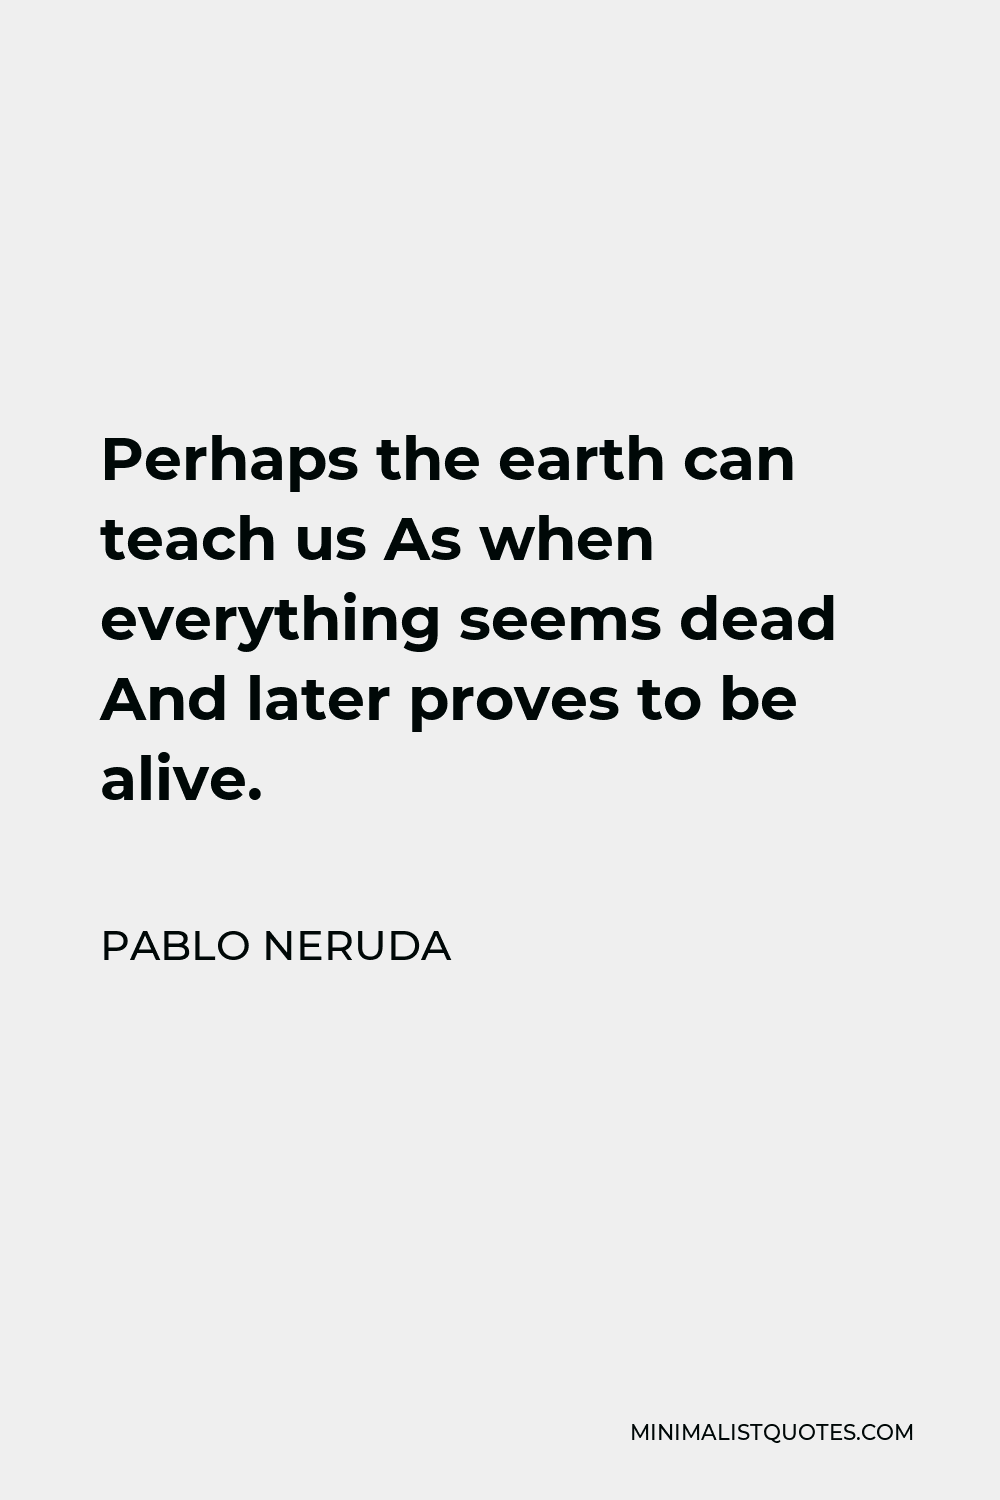 Pablo Neruda Quote - Perhaps the earth can teach us As when everything seems dead And later proves to be alive.